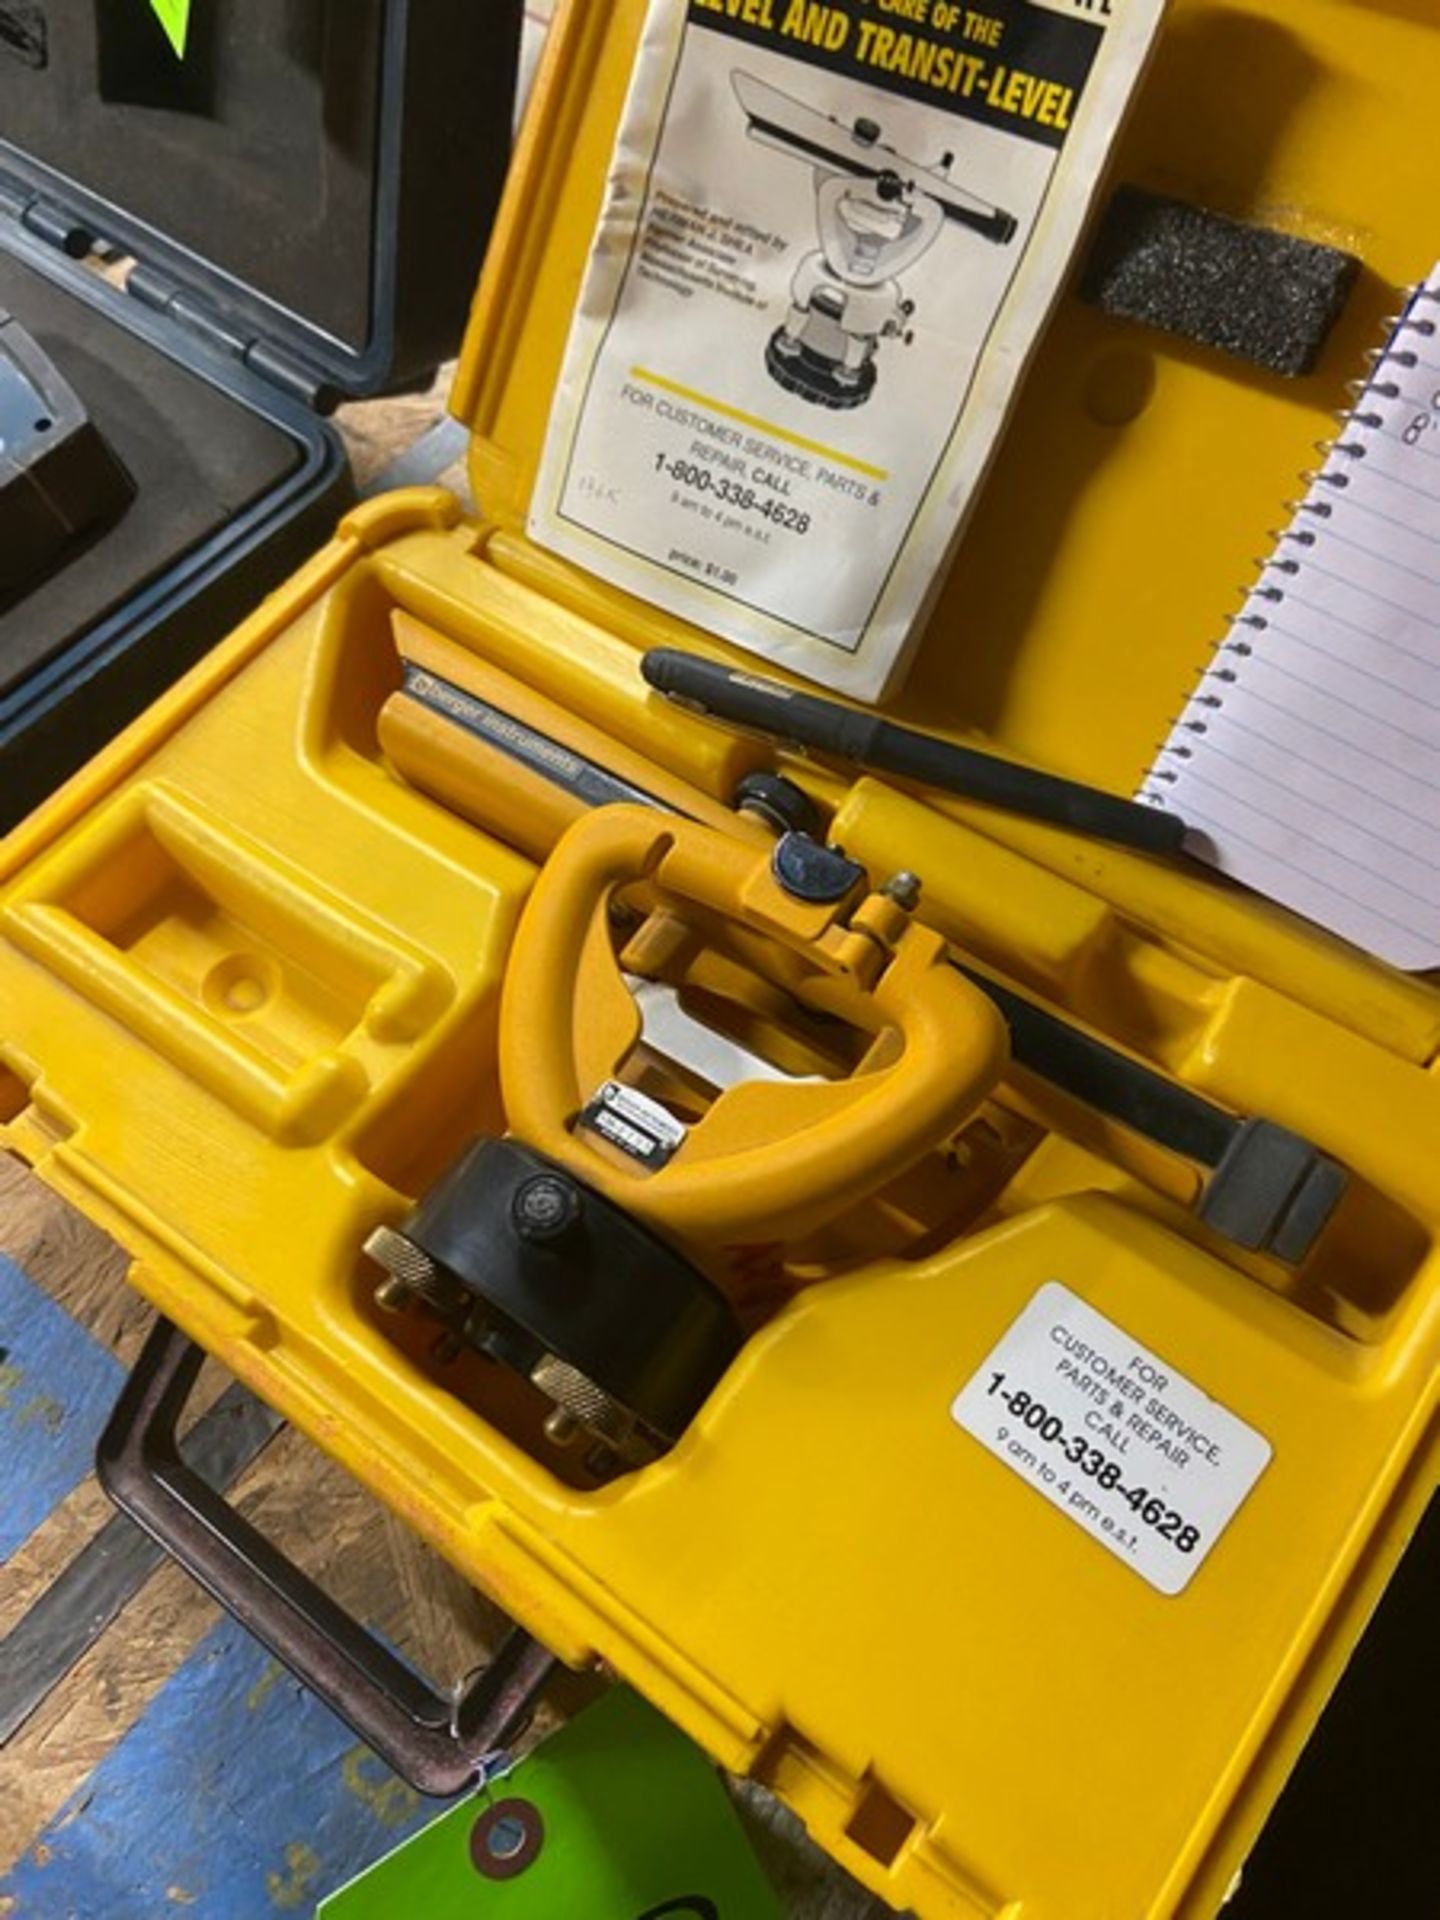 Berger Instruments Level & Transit-Level, M/B 136, S/N 136-2733, Hard Case (LOCATED IN - Image 5 of 5